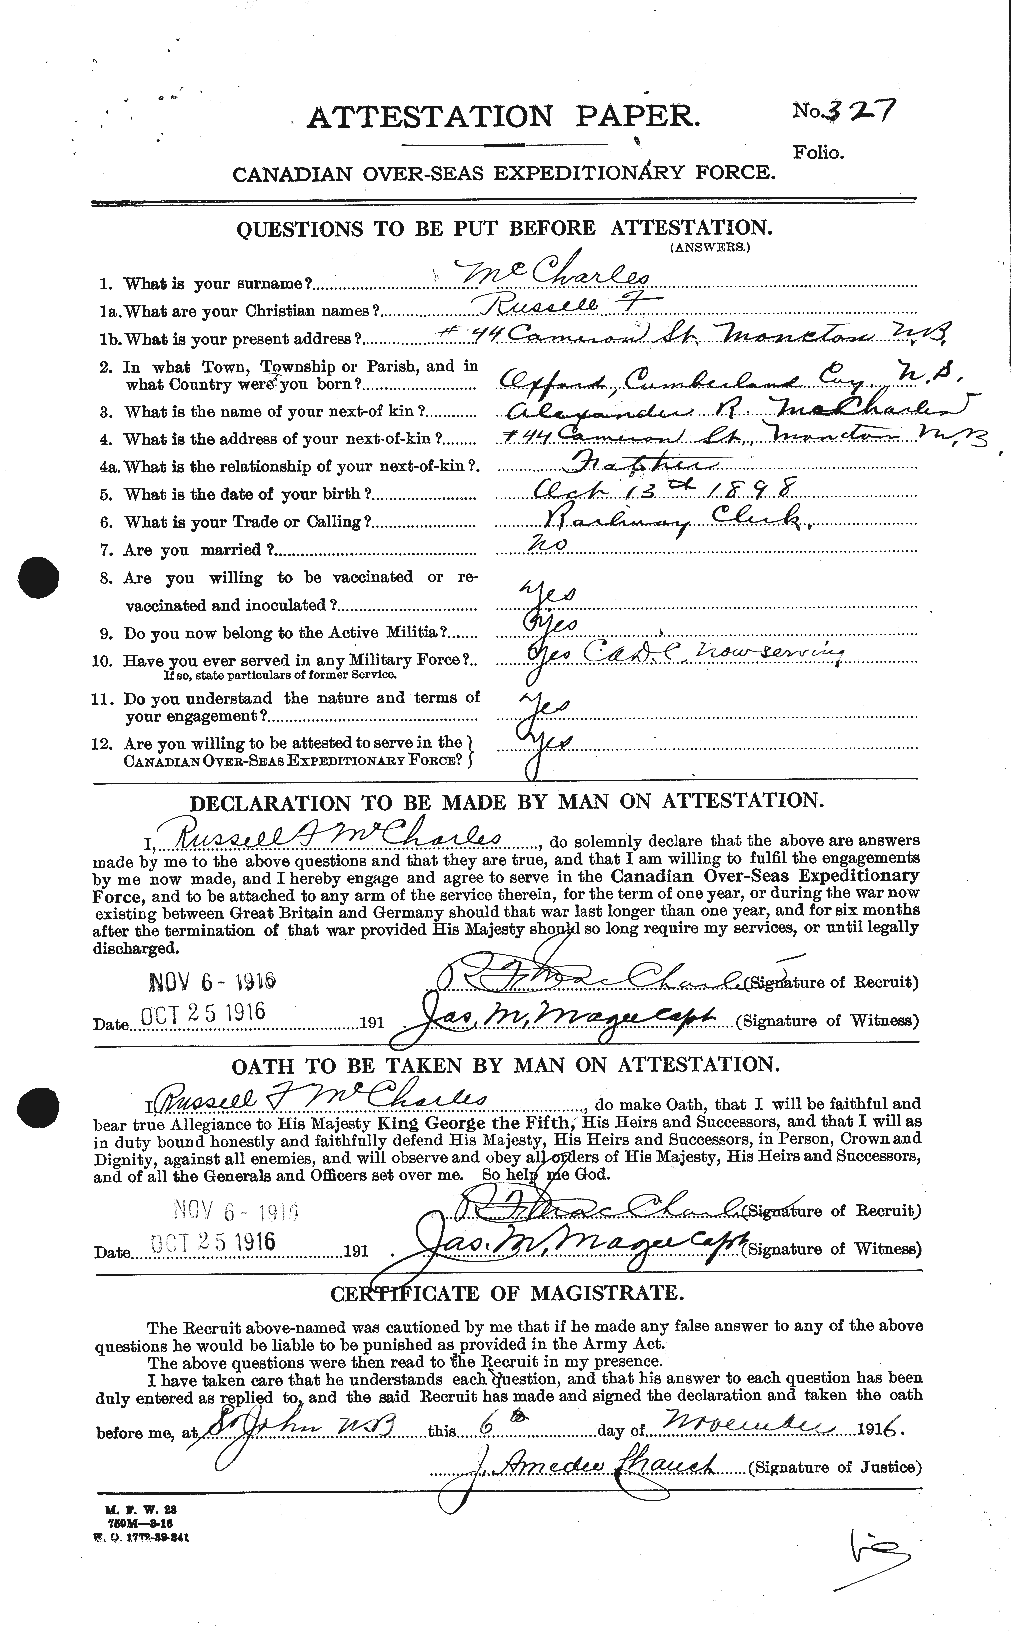 Personnel Records of the First World War - CEF 135660a